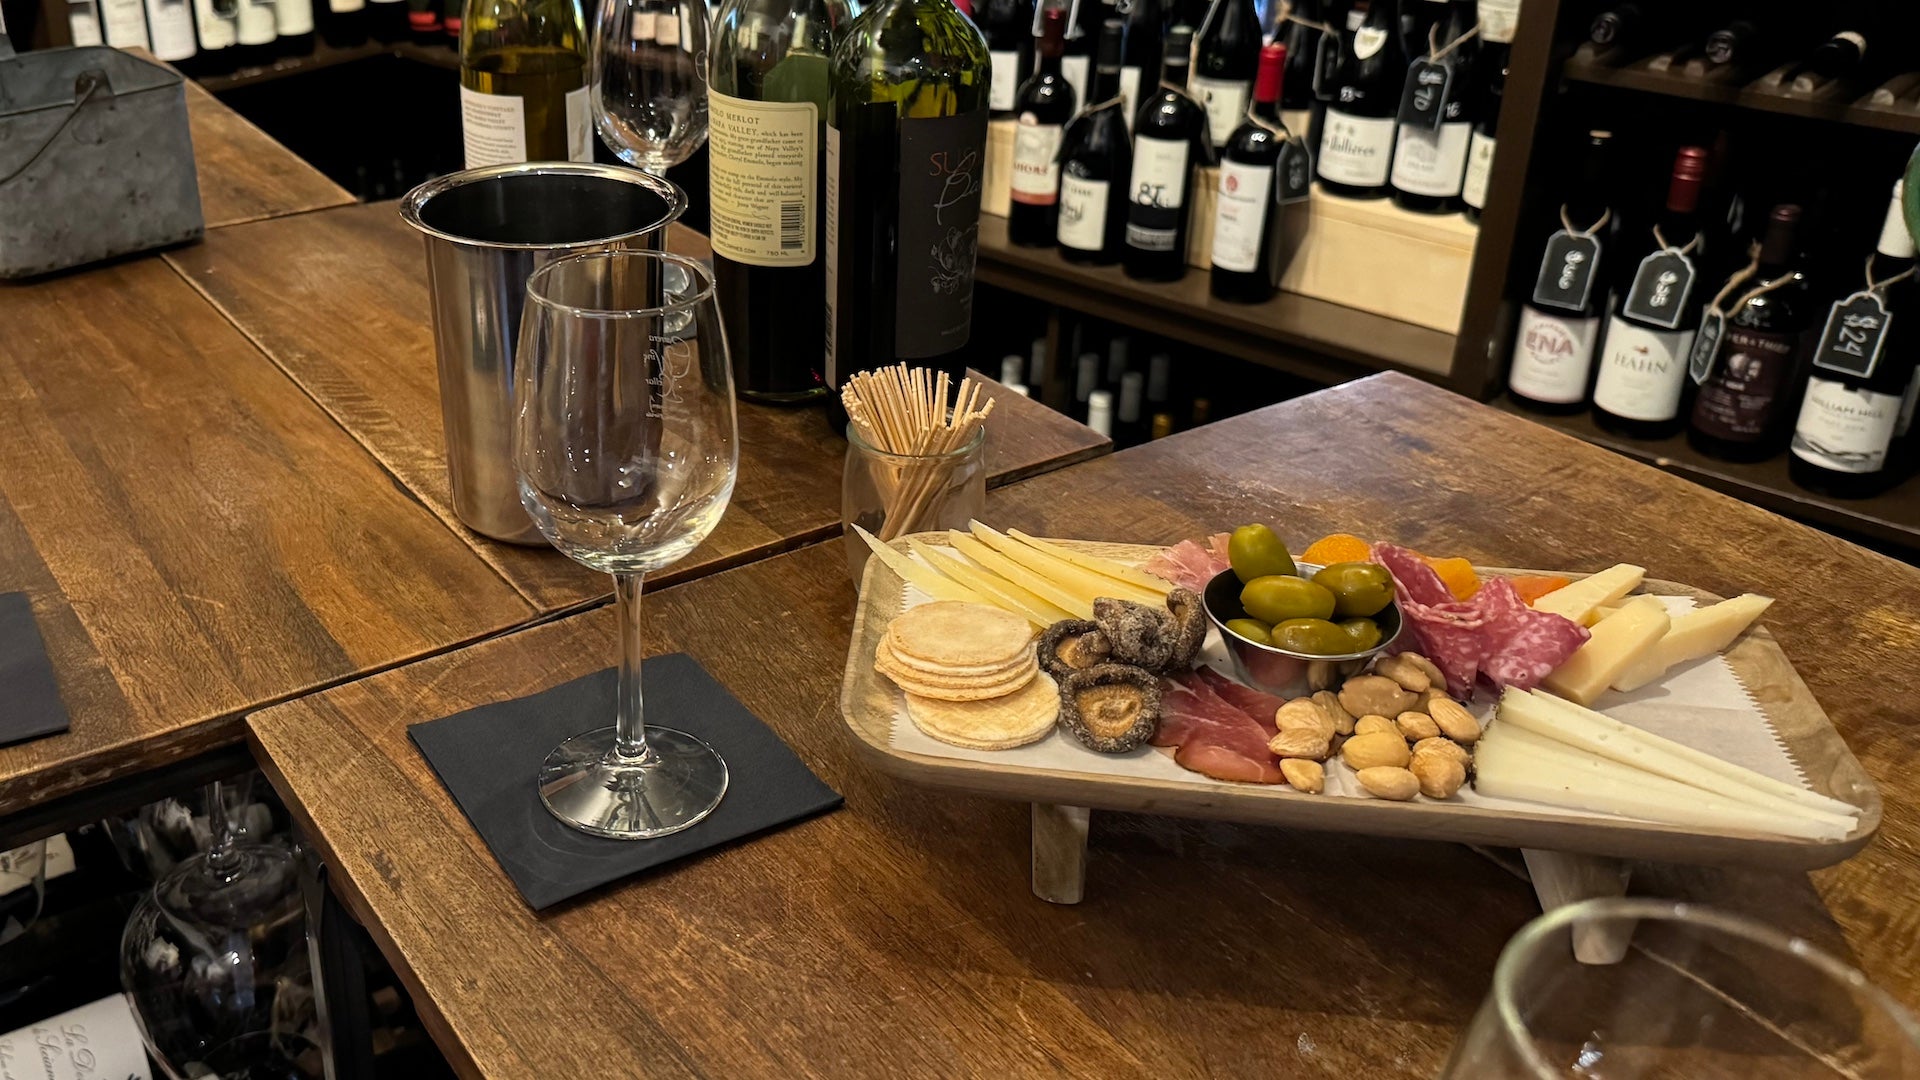 Charcuterie board on a table with a wine glass next to it